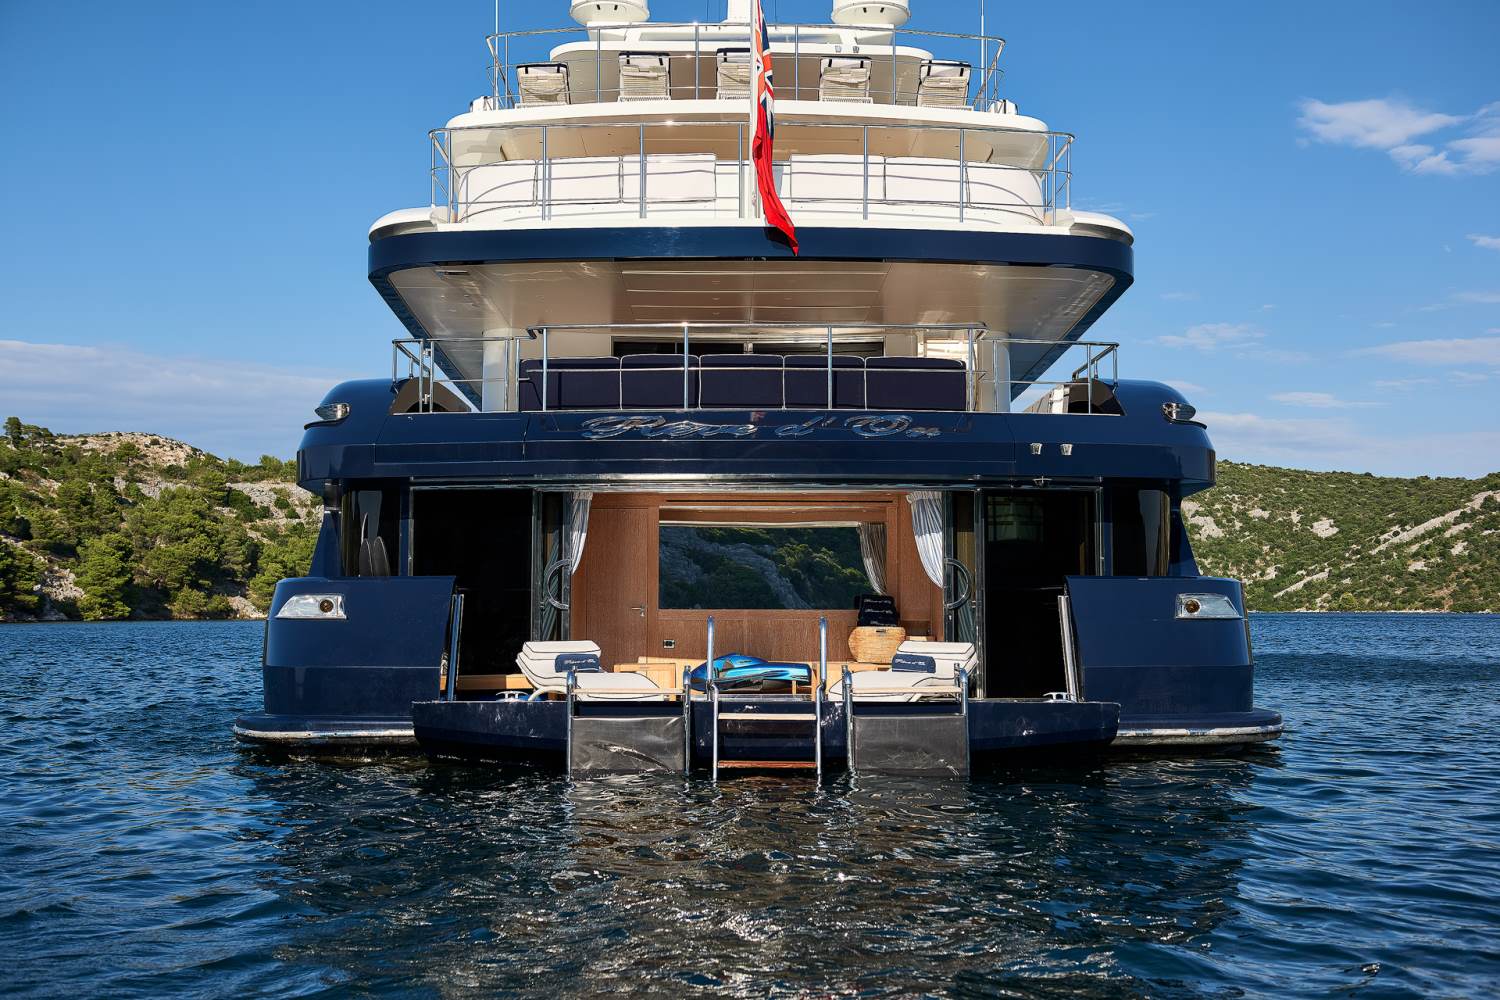 reve d'or yacht owner